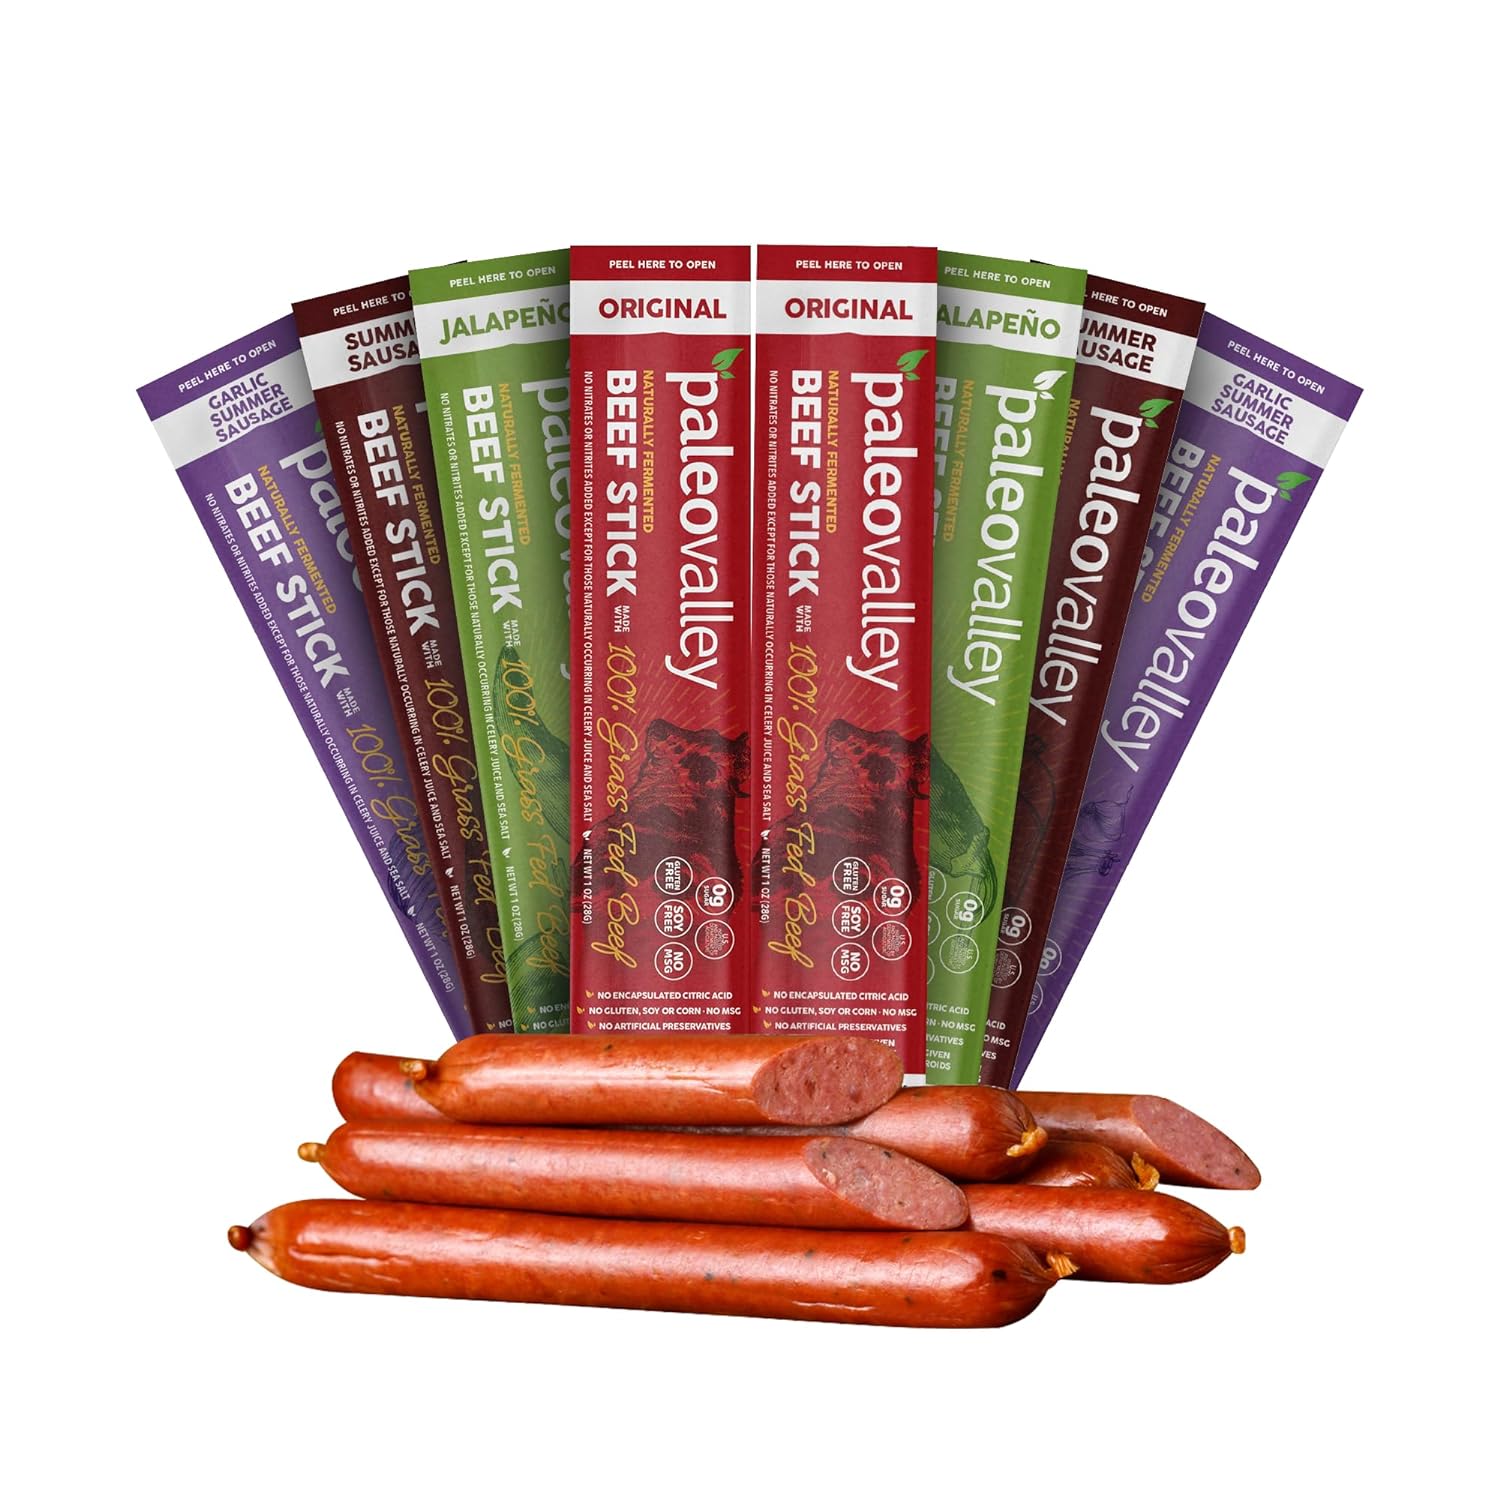 Paleovalley 100% Grass Fed Beef Sticks - Delicious Gluten Free Beef Snack - High Protein Keto Friendly, 40 Count Variety Pack